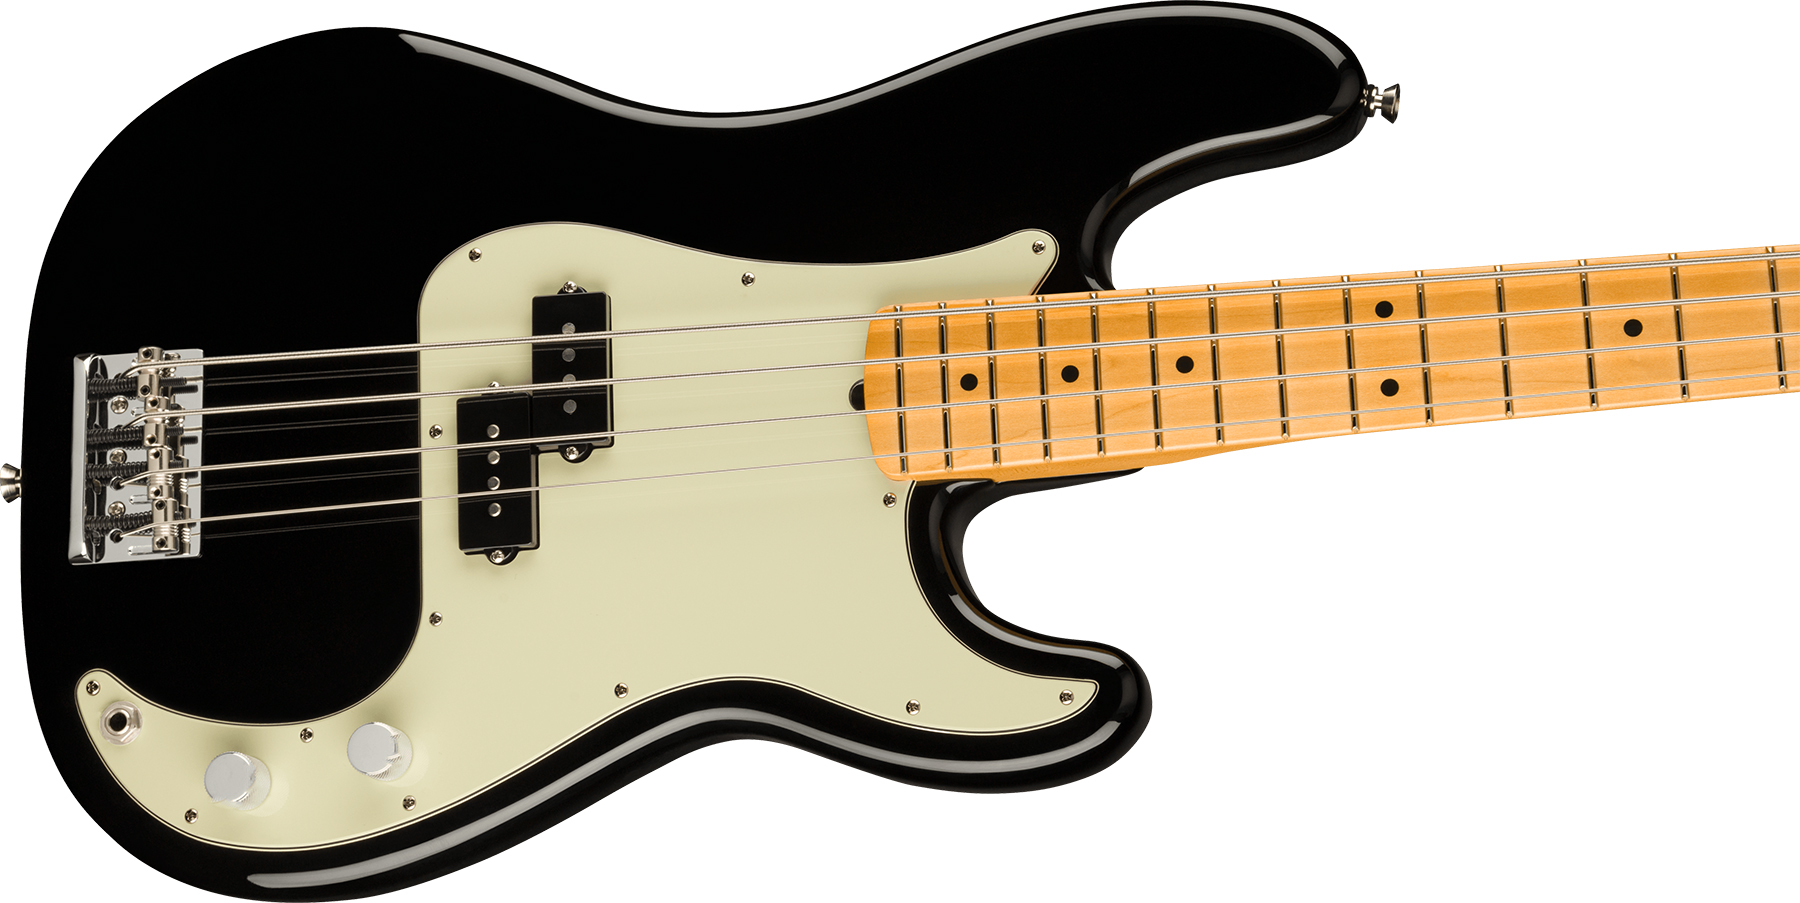 Fender Precision Bass American Professional Ii Usa Mn - Black - Basse Électrique Solid Body - Variation 2